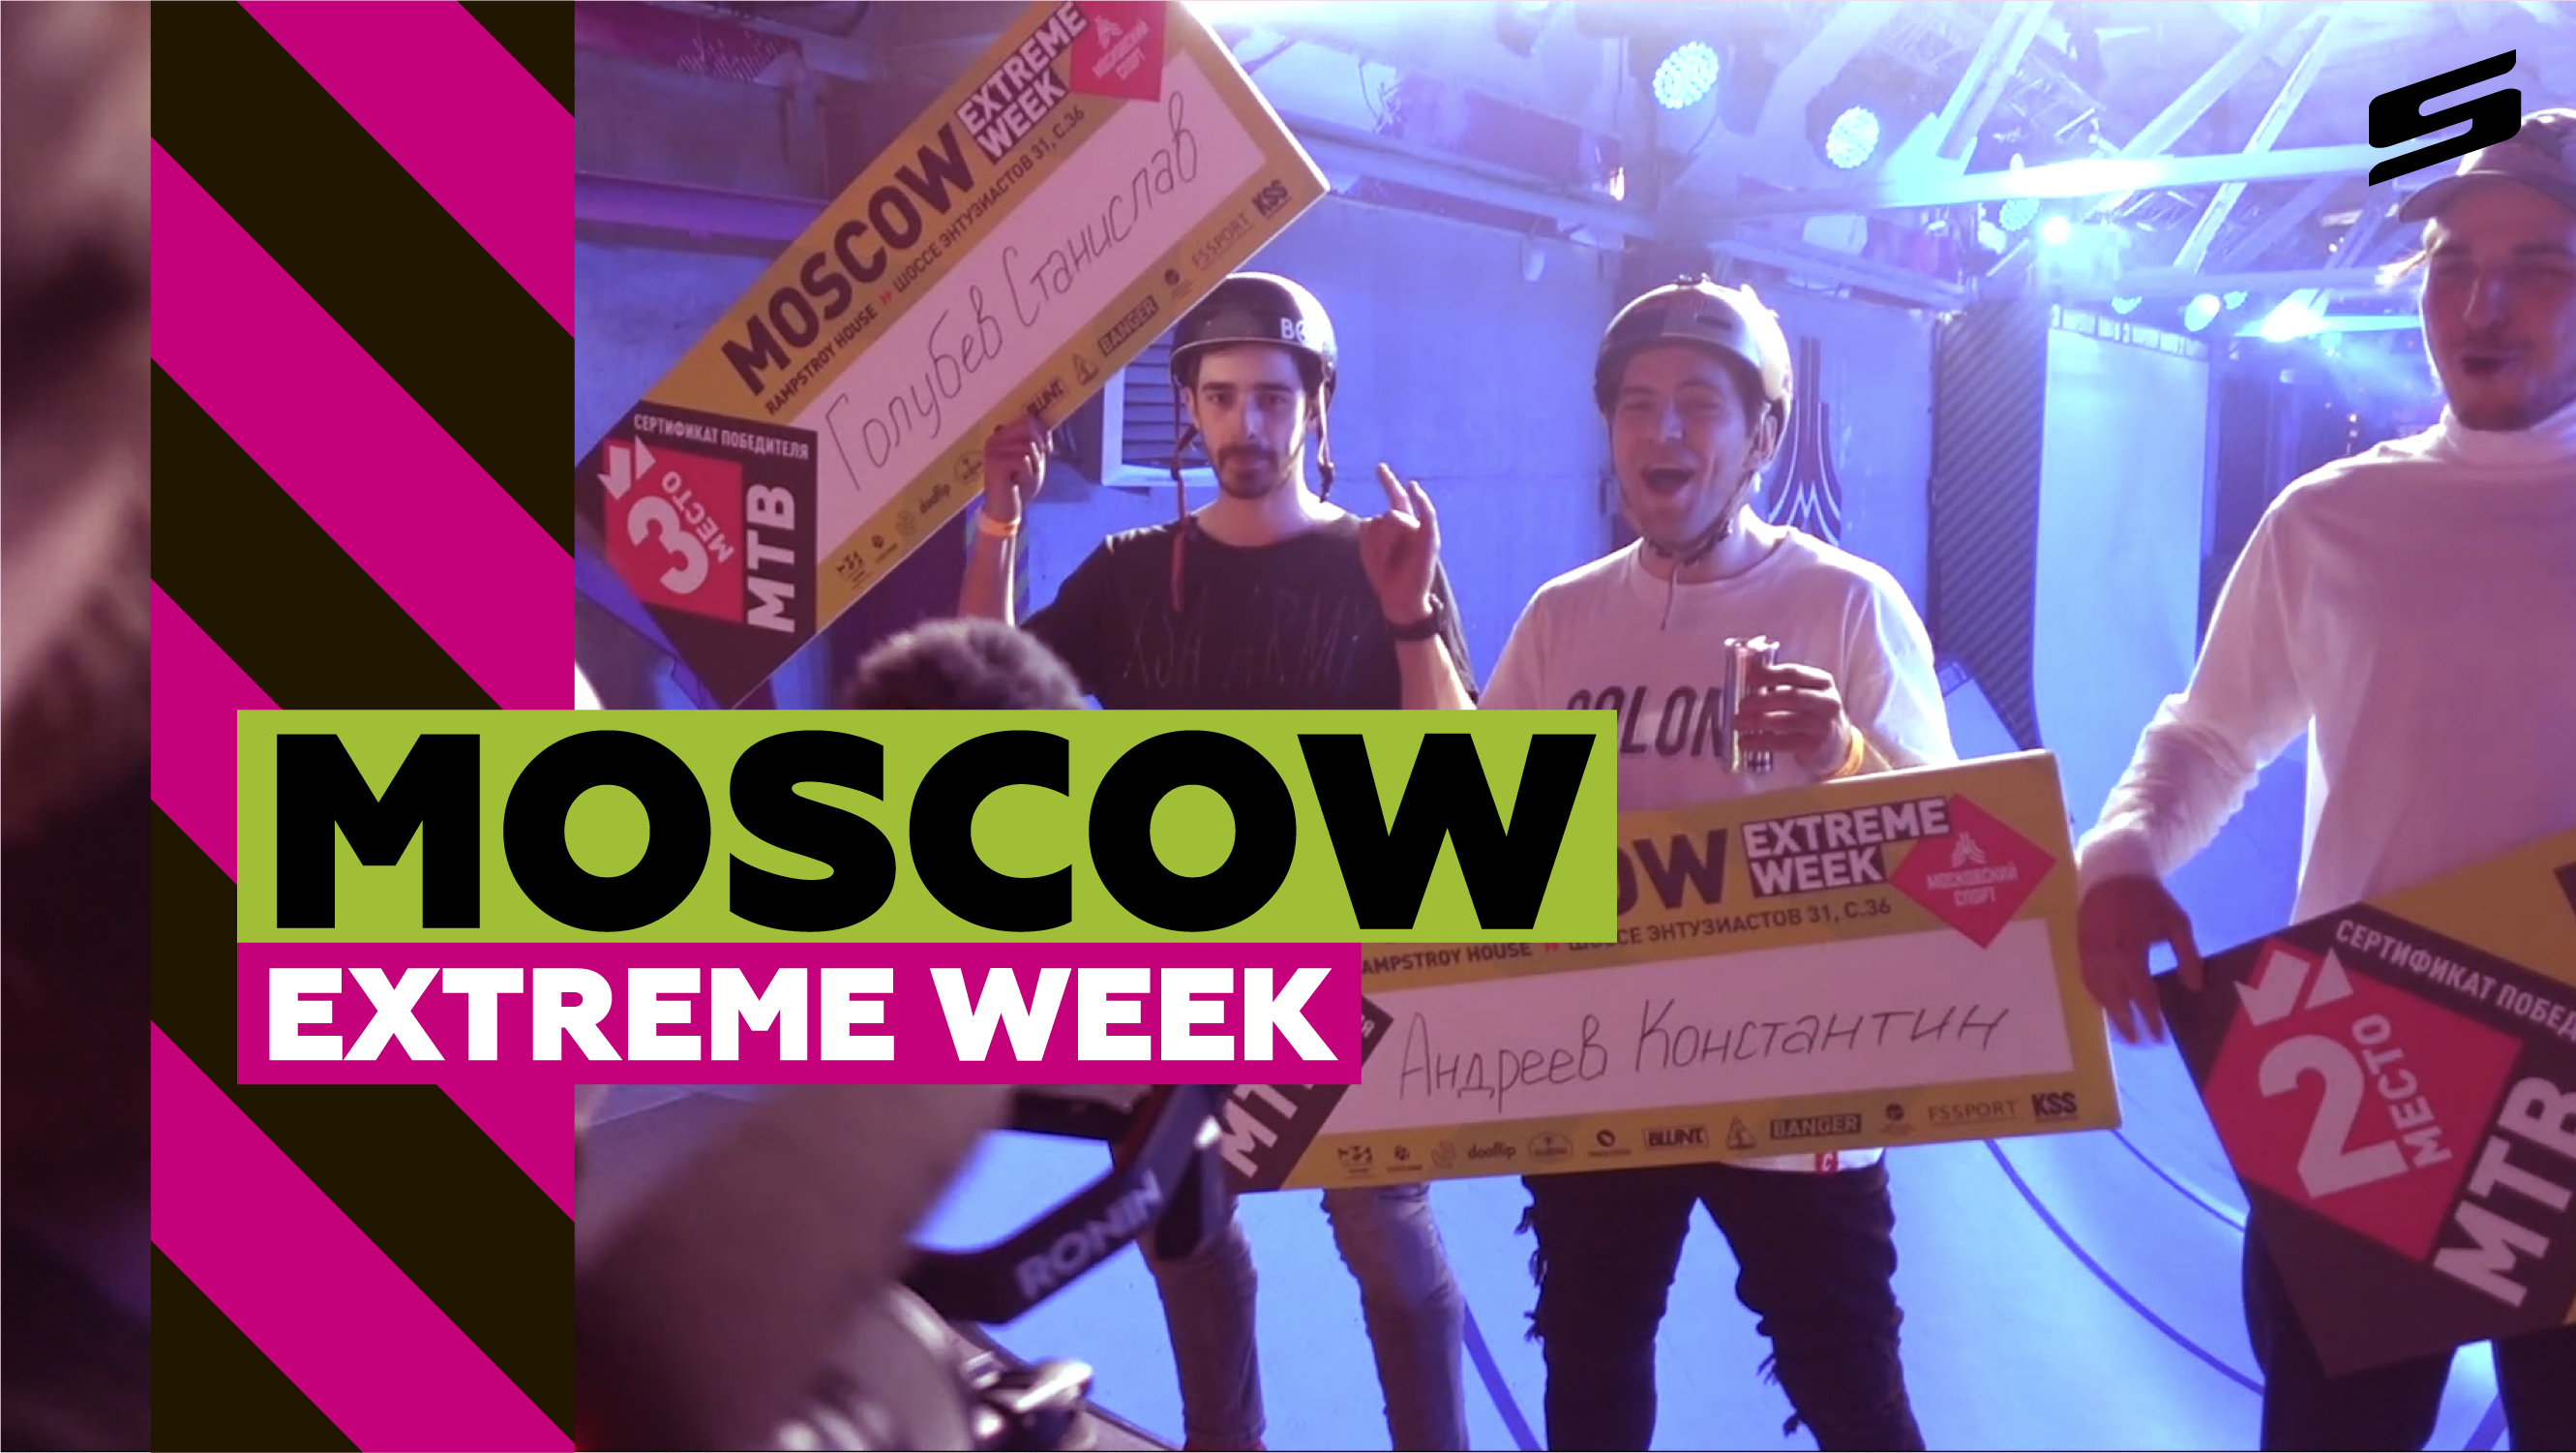 #MOSCOWEXTREMEWEEK​ 2021